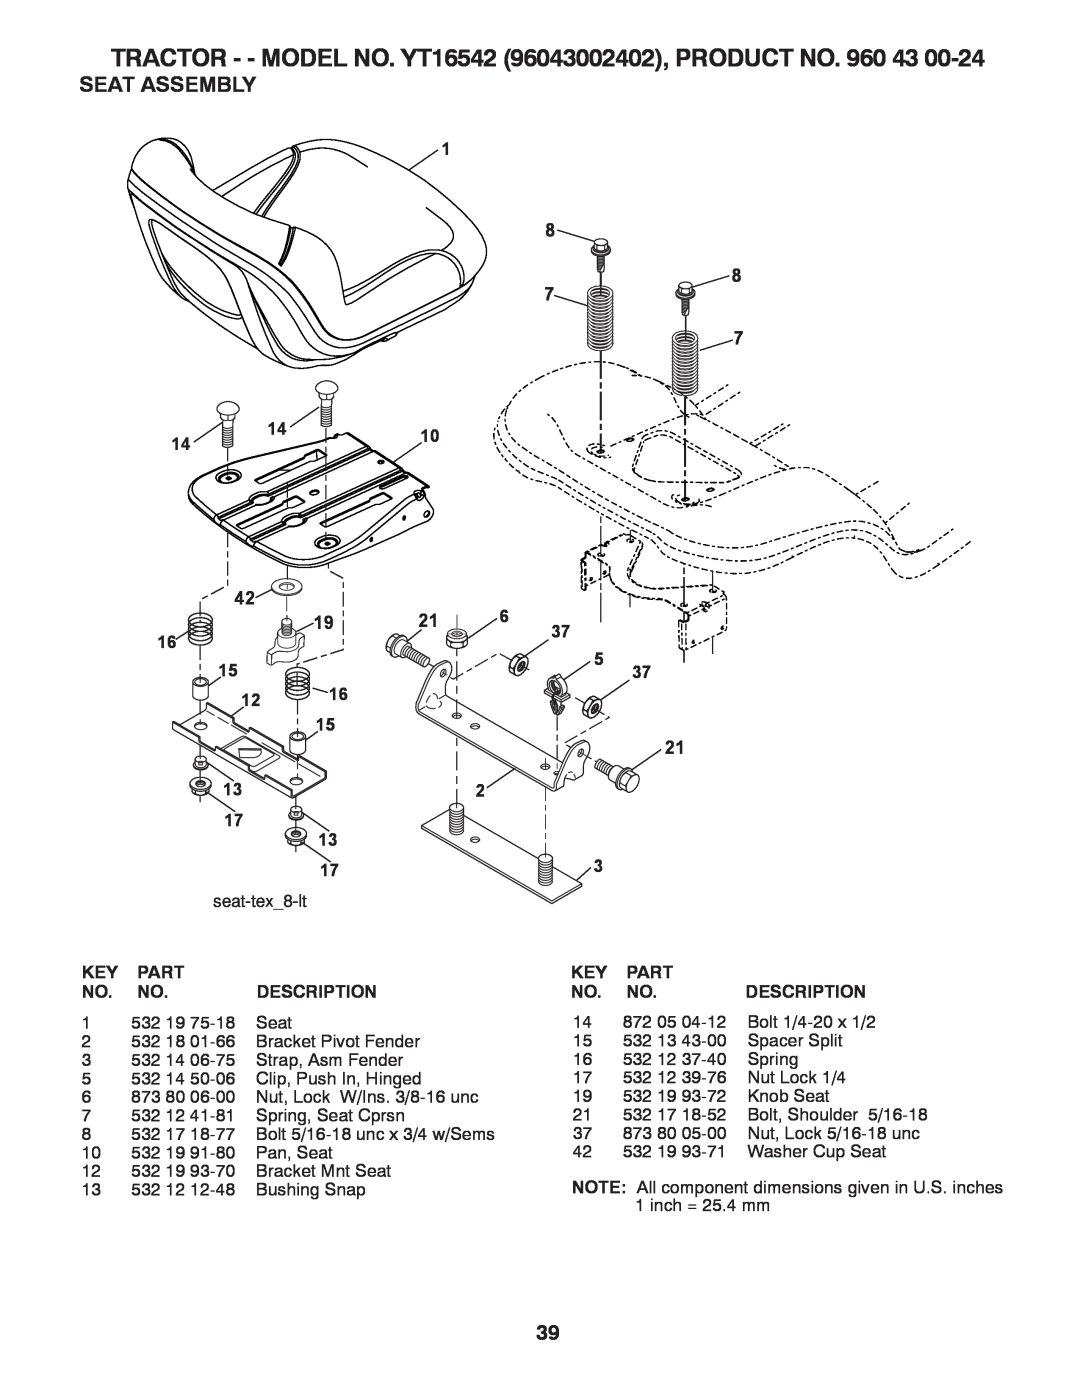 Husqvarna owner manual Seat Assembly, TRACTOR - - MODEL NO. YT16542 96043002402, PRODUCT NO, Seattex?Lt 